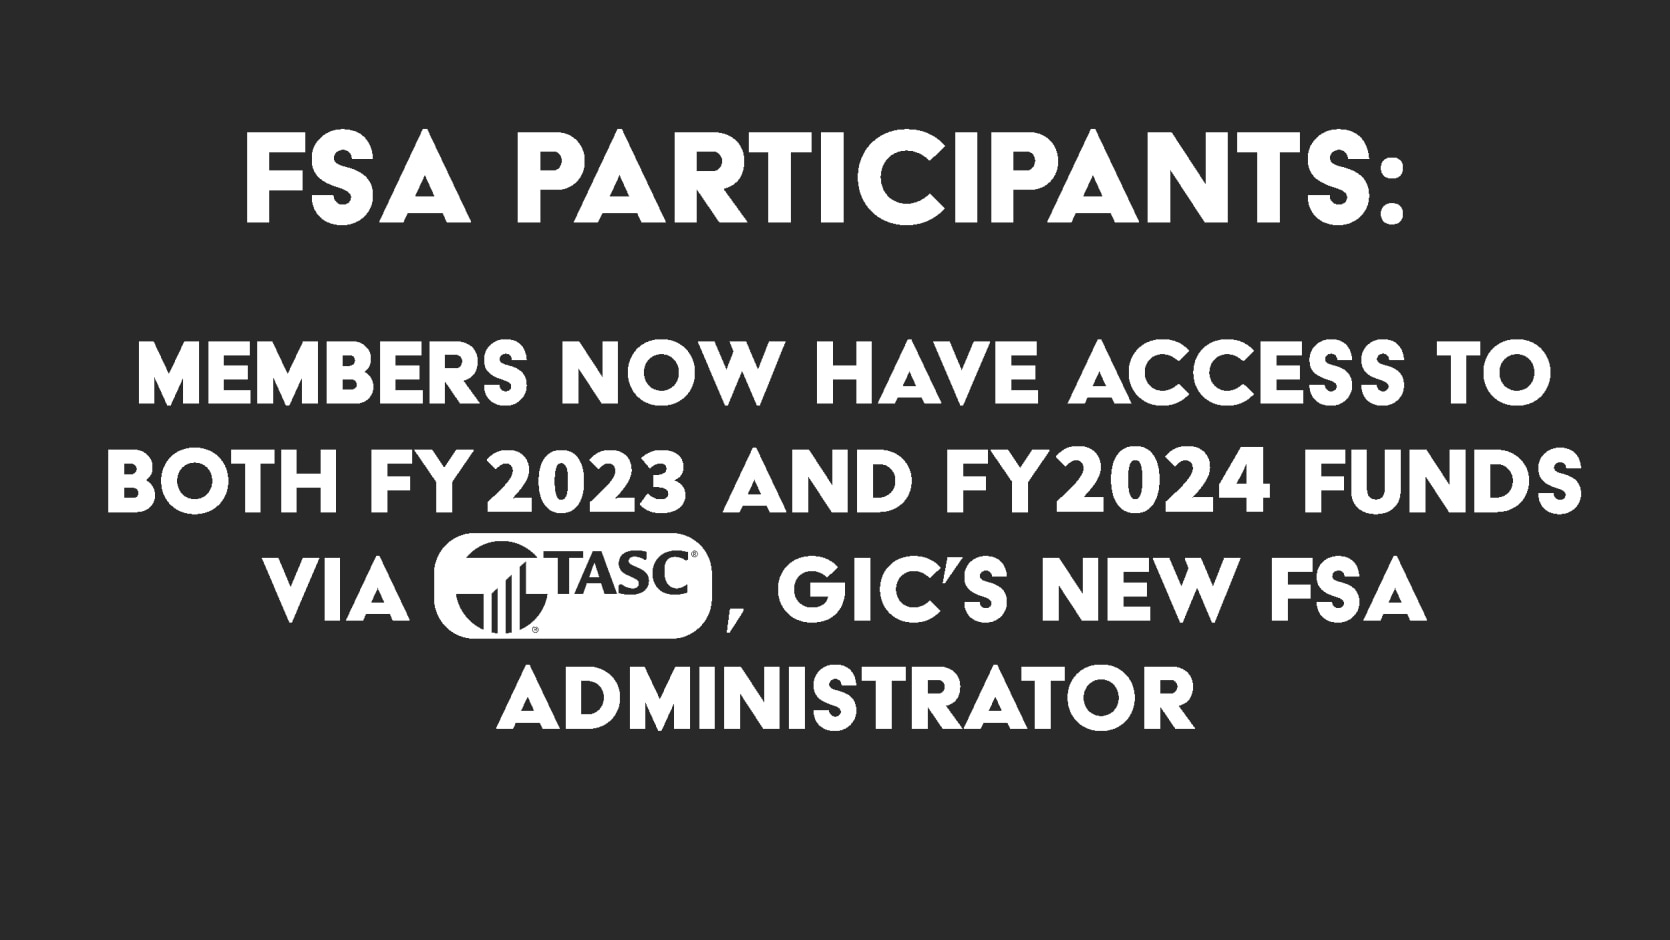 FSA PARTICIPANTS: Members now have access to both FY2023 and FY2024 funds via TASC, GIC’s new FSA administrator